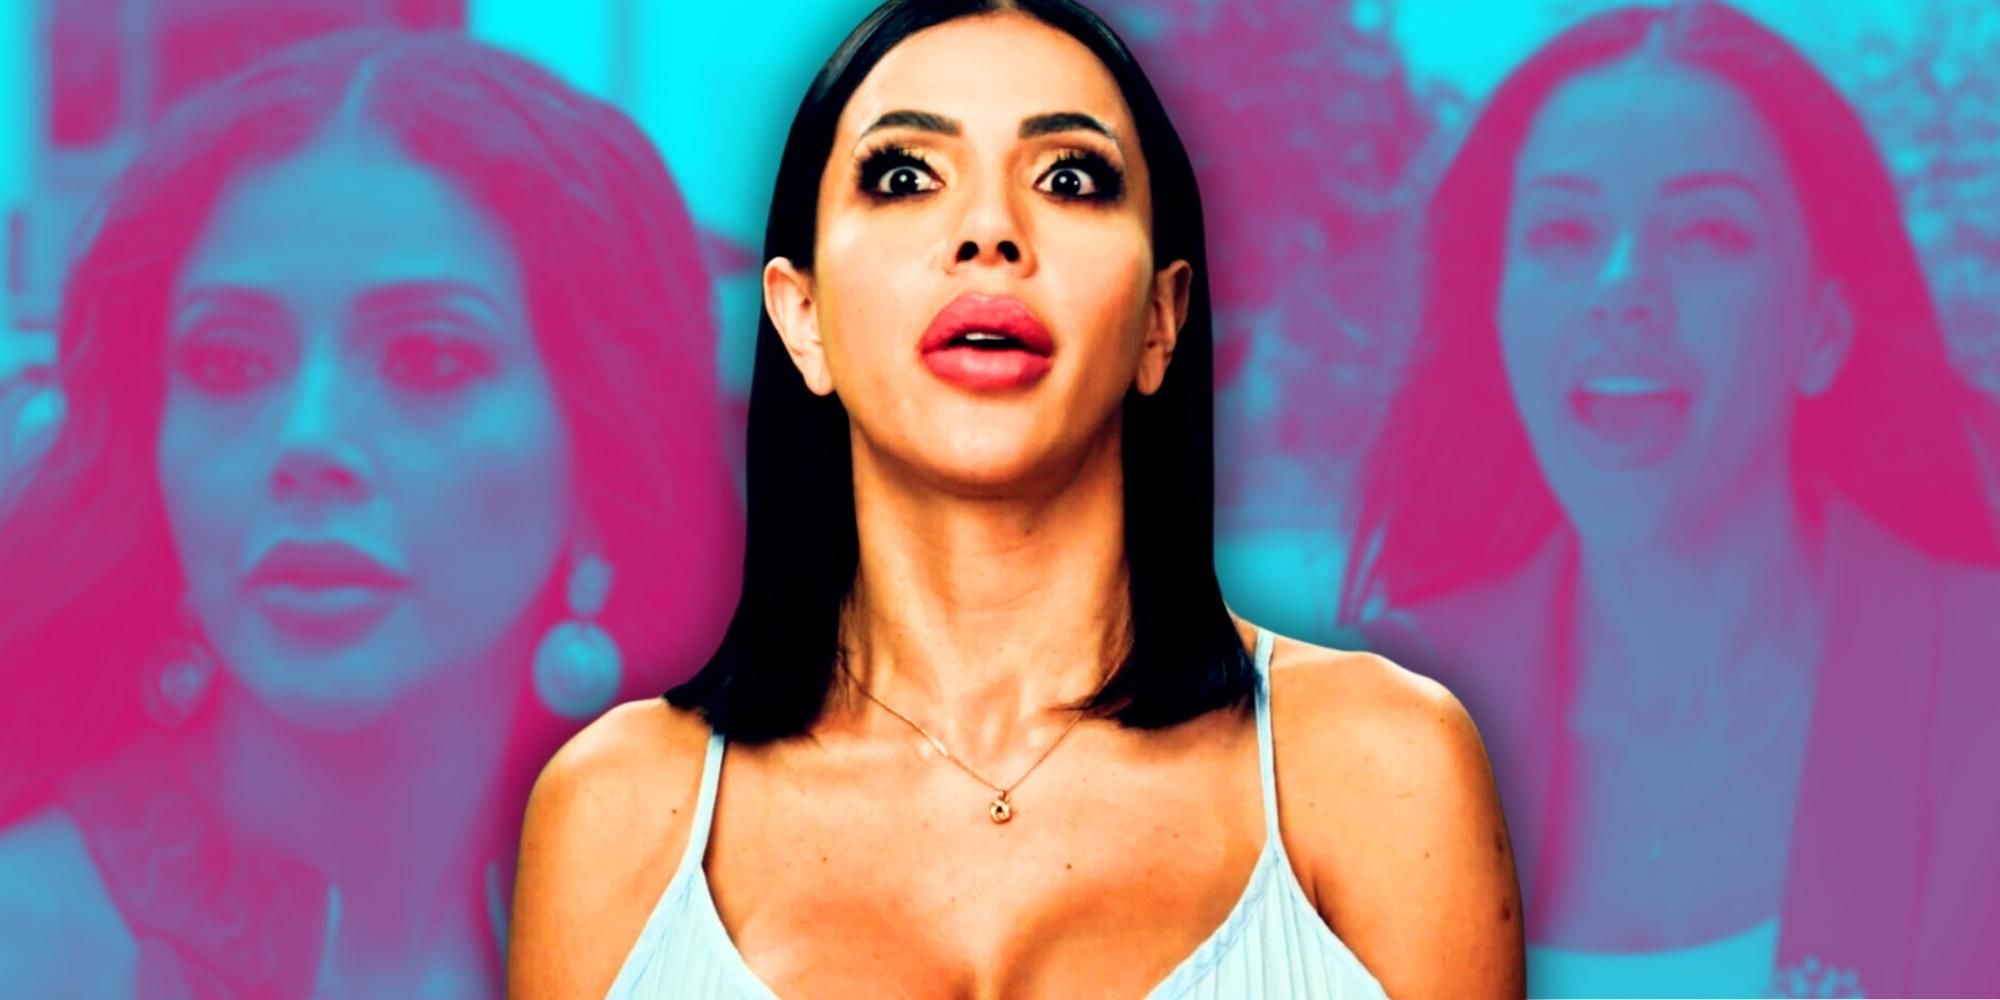 90 Day Fiancé star Jasmine Pineda wearing tank top and looking surprised with blue and pink background photos of herself